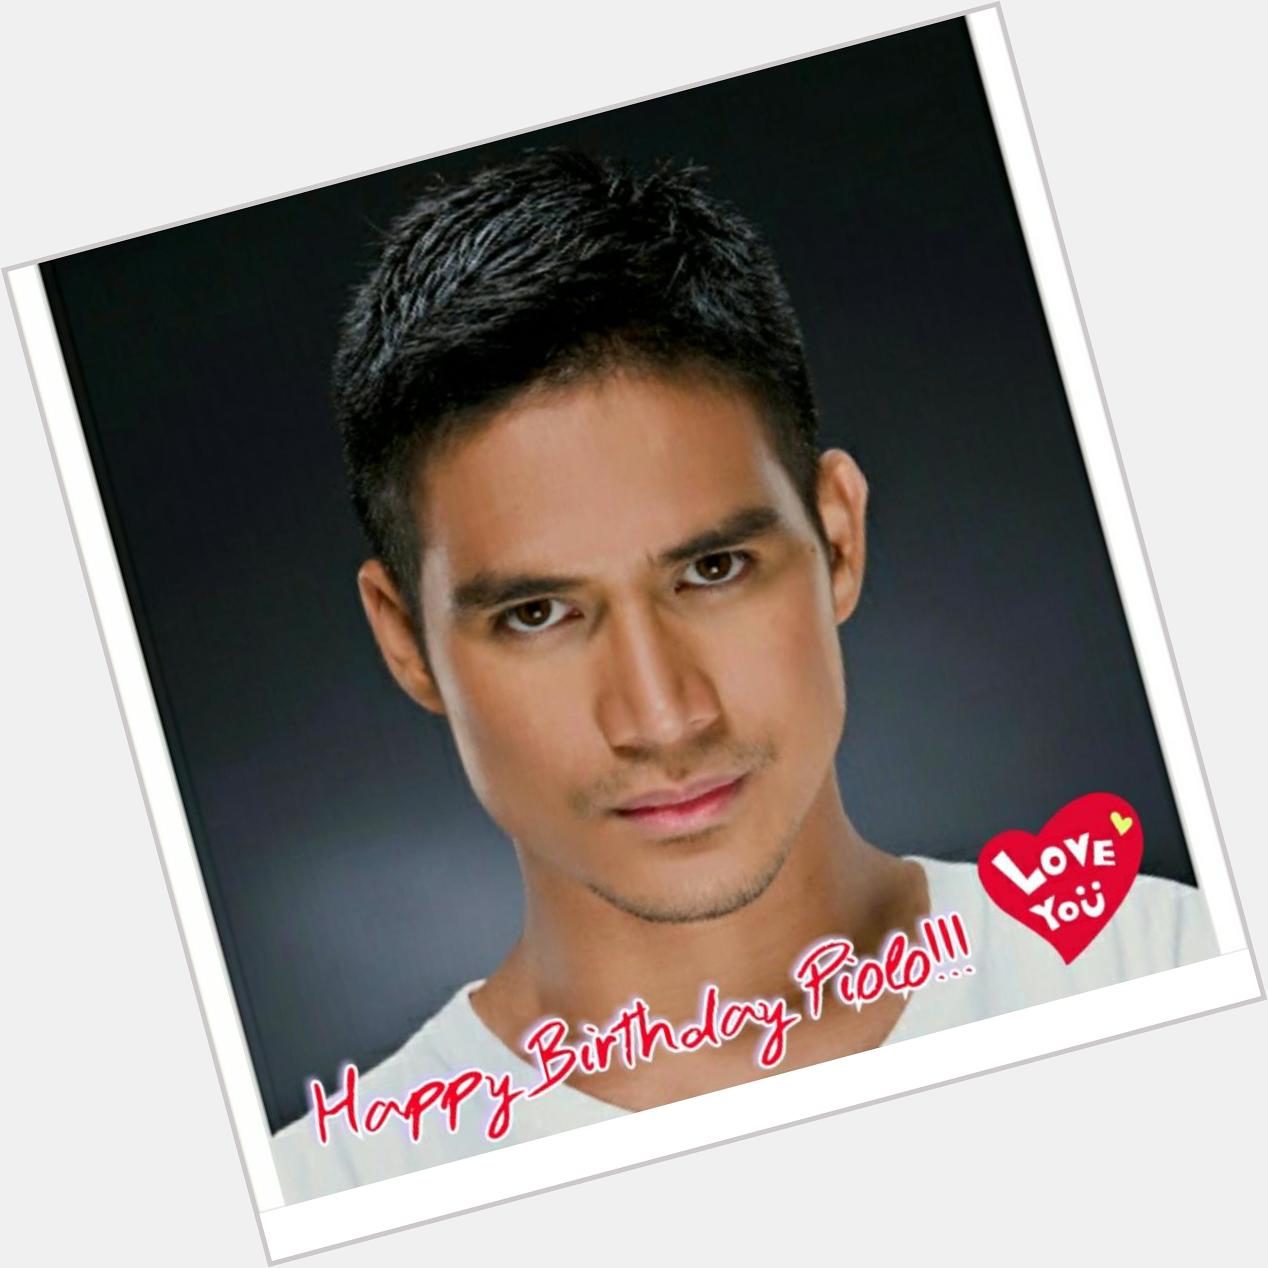 Happy Birthday to the very talented, handsome and a great person Piolo Pascual!! 